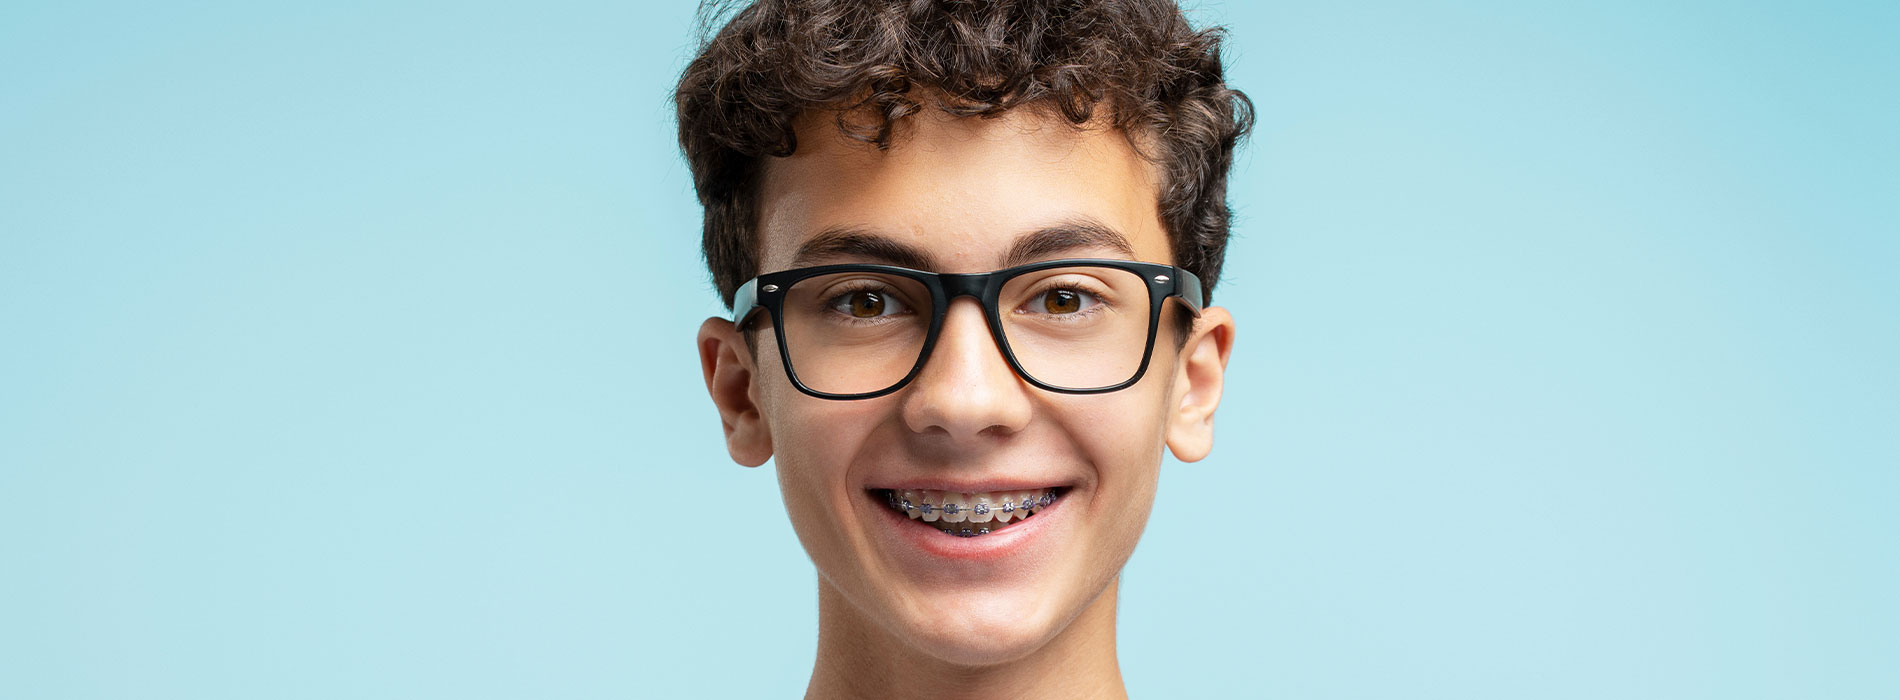 The image features a young person with glasses, smiling at the camera. They have short hair and appear to be wearing braces. The background is plain and light-colored, providing a clear contrast to the subject.